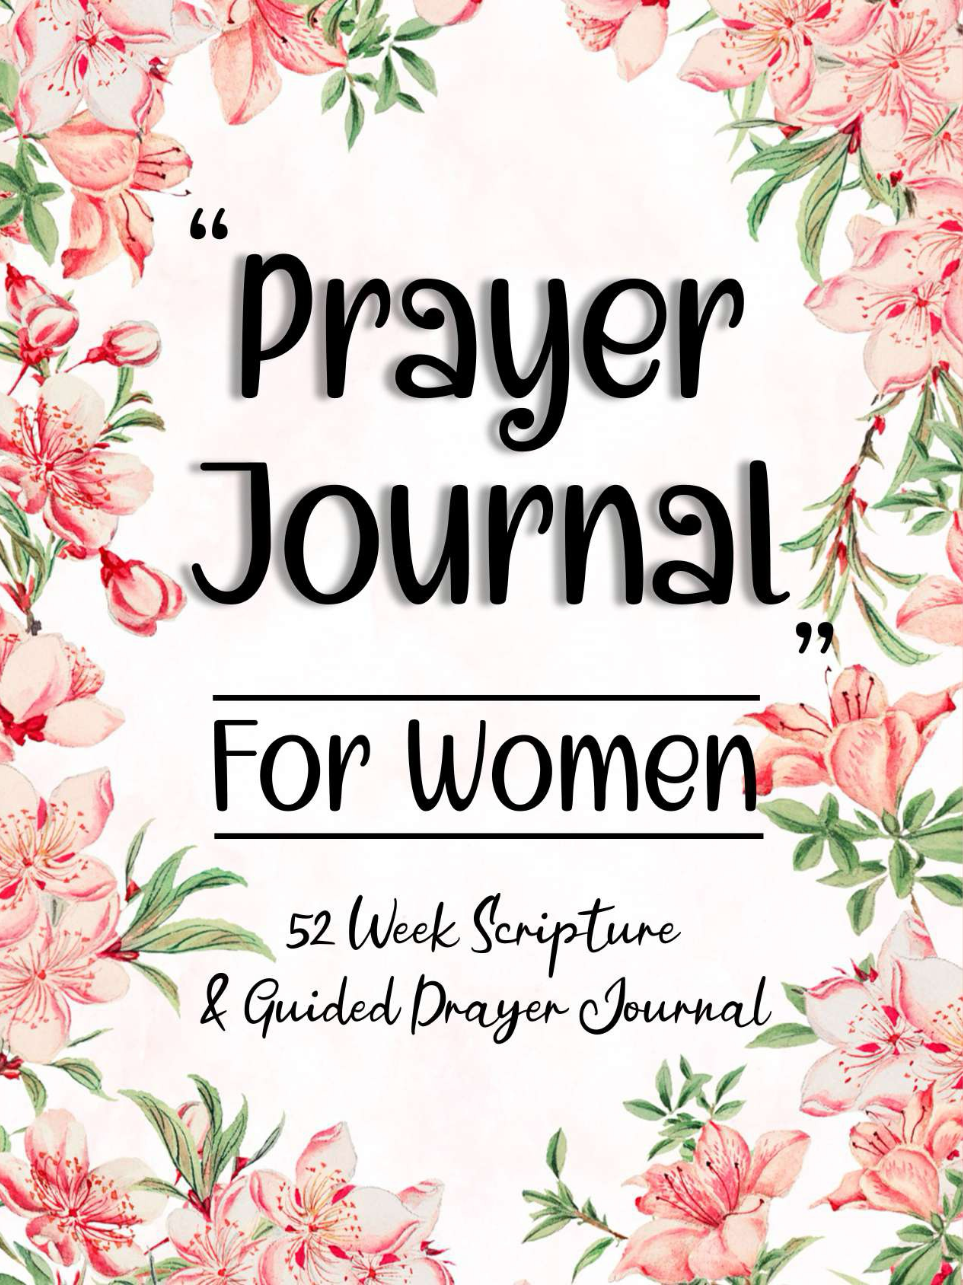 Unlock Spiritual Transformation with Our Bible Study & Guided Prayer Journal for Women - 52 Weeks of Scripture and Faith Growth 🙏